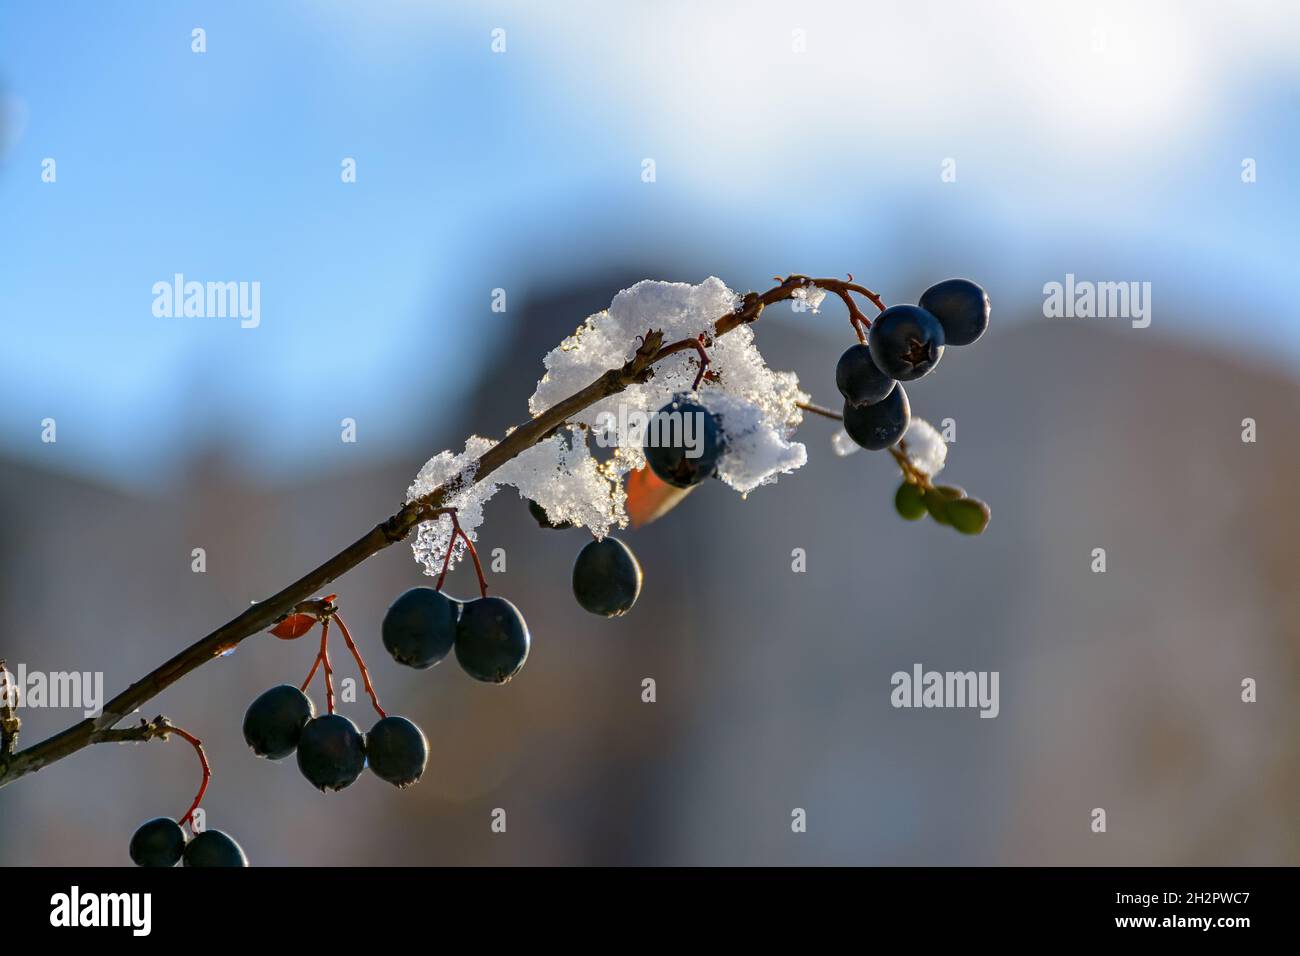 The first snow that covered the bushes of the decorative black-fruited cotoneaster in the city squares. Stock Photo